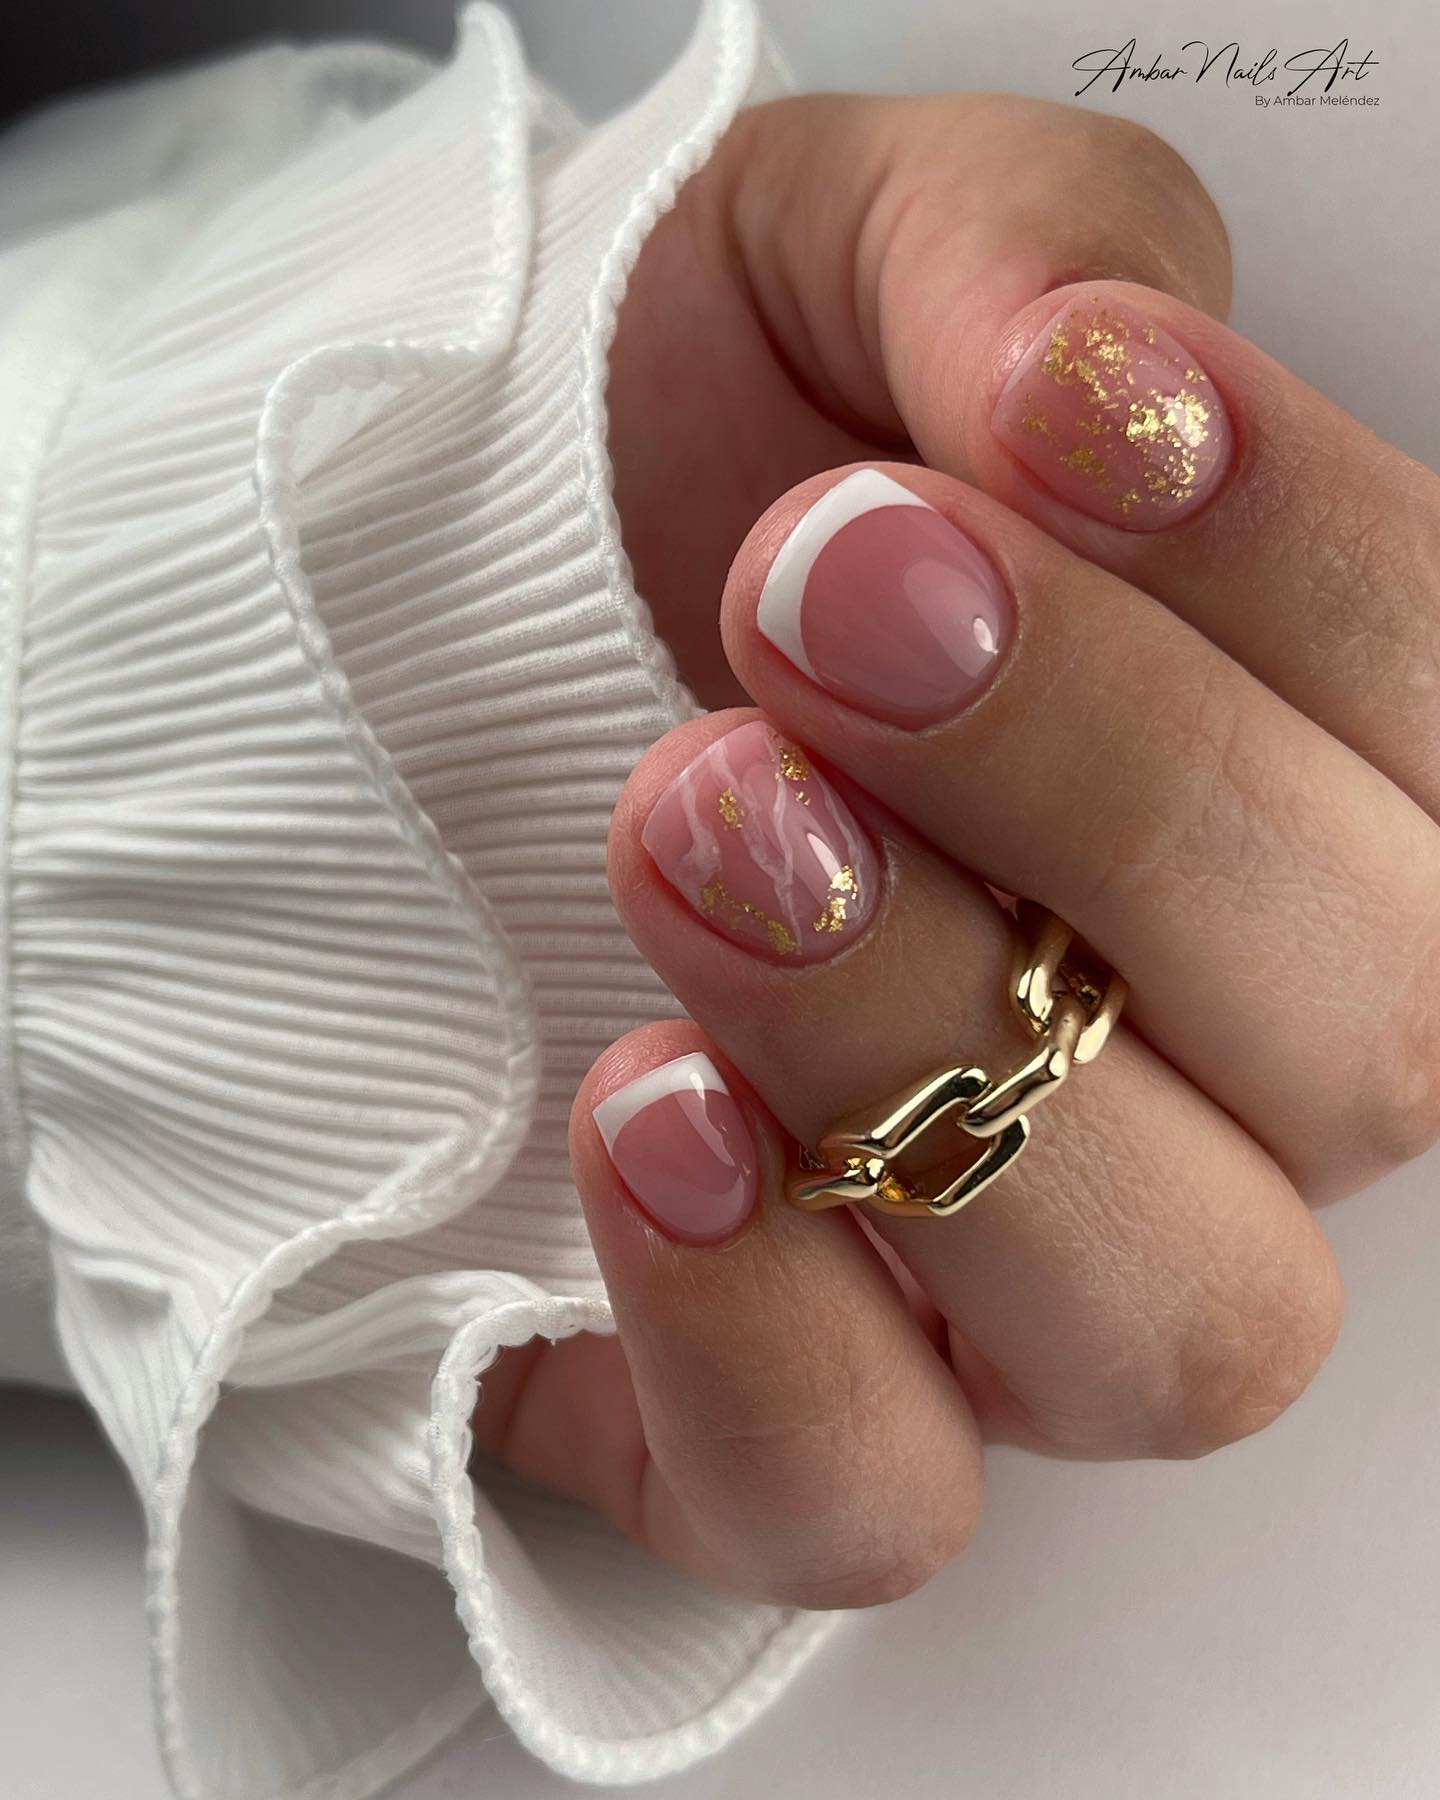 Very short White French Tip Nails with golden glitter